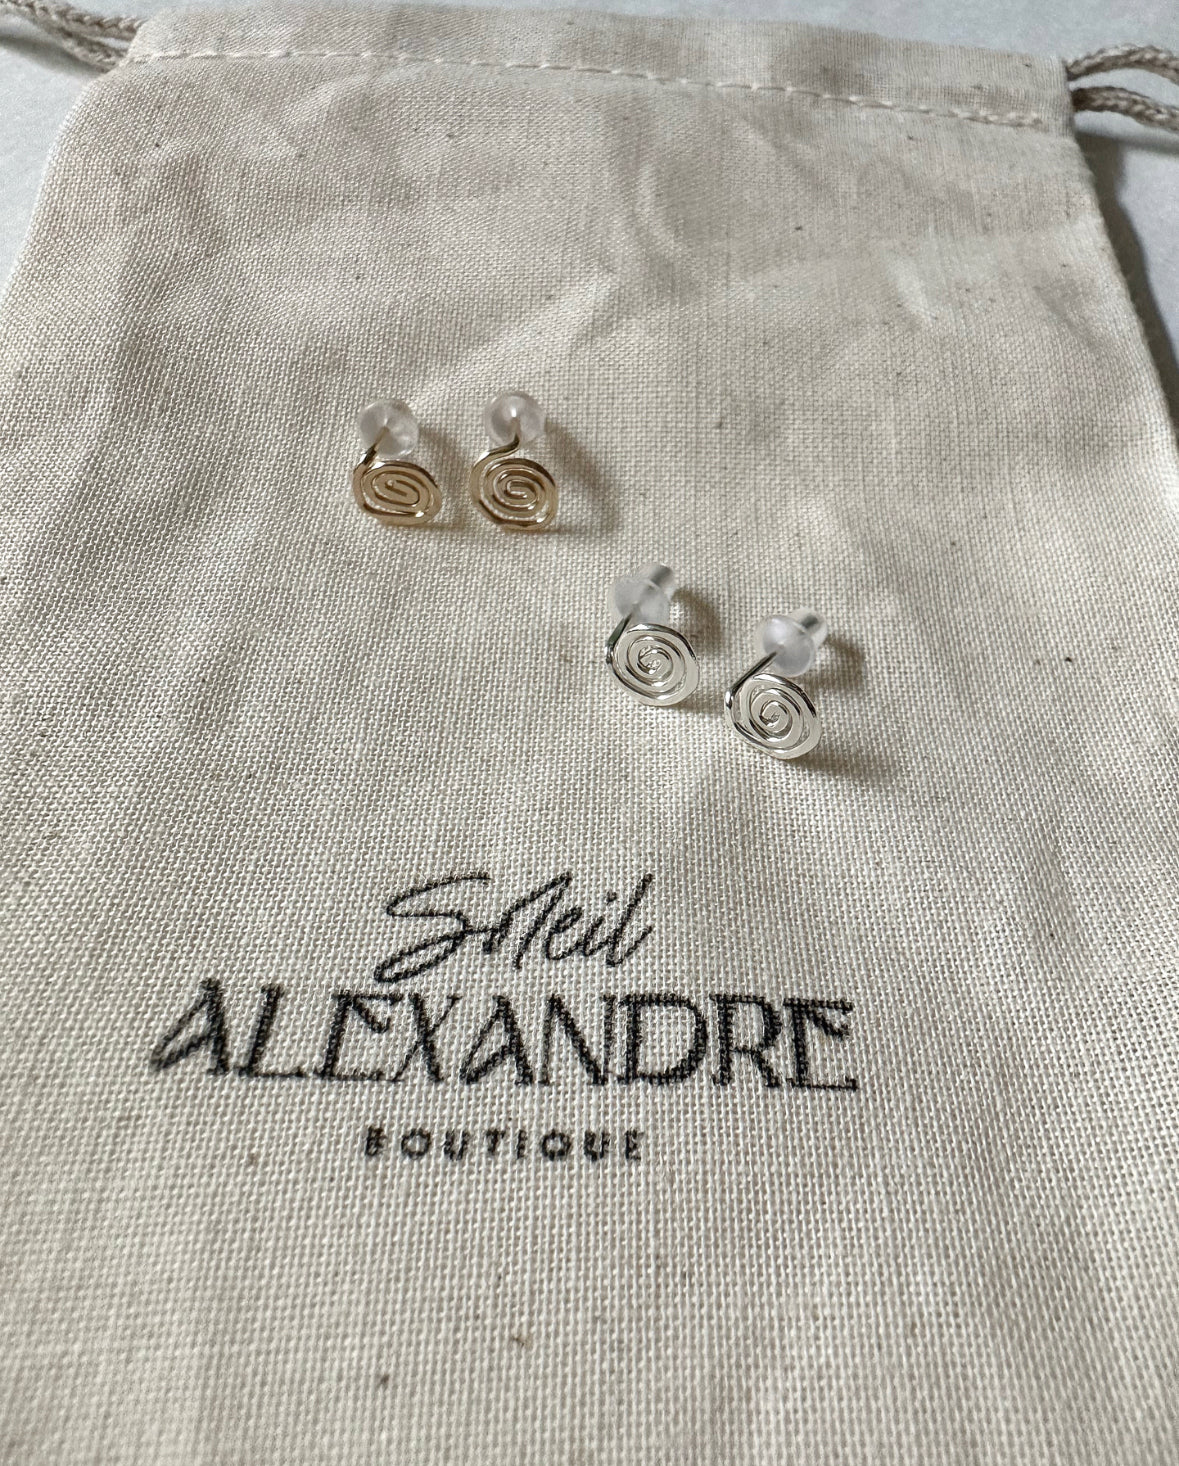 Gold and Silver Vortex Stud Earrings styled on top of our drawstring jewelry bag.